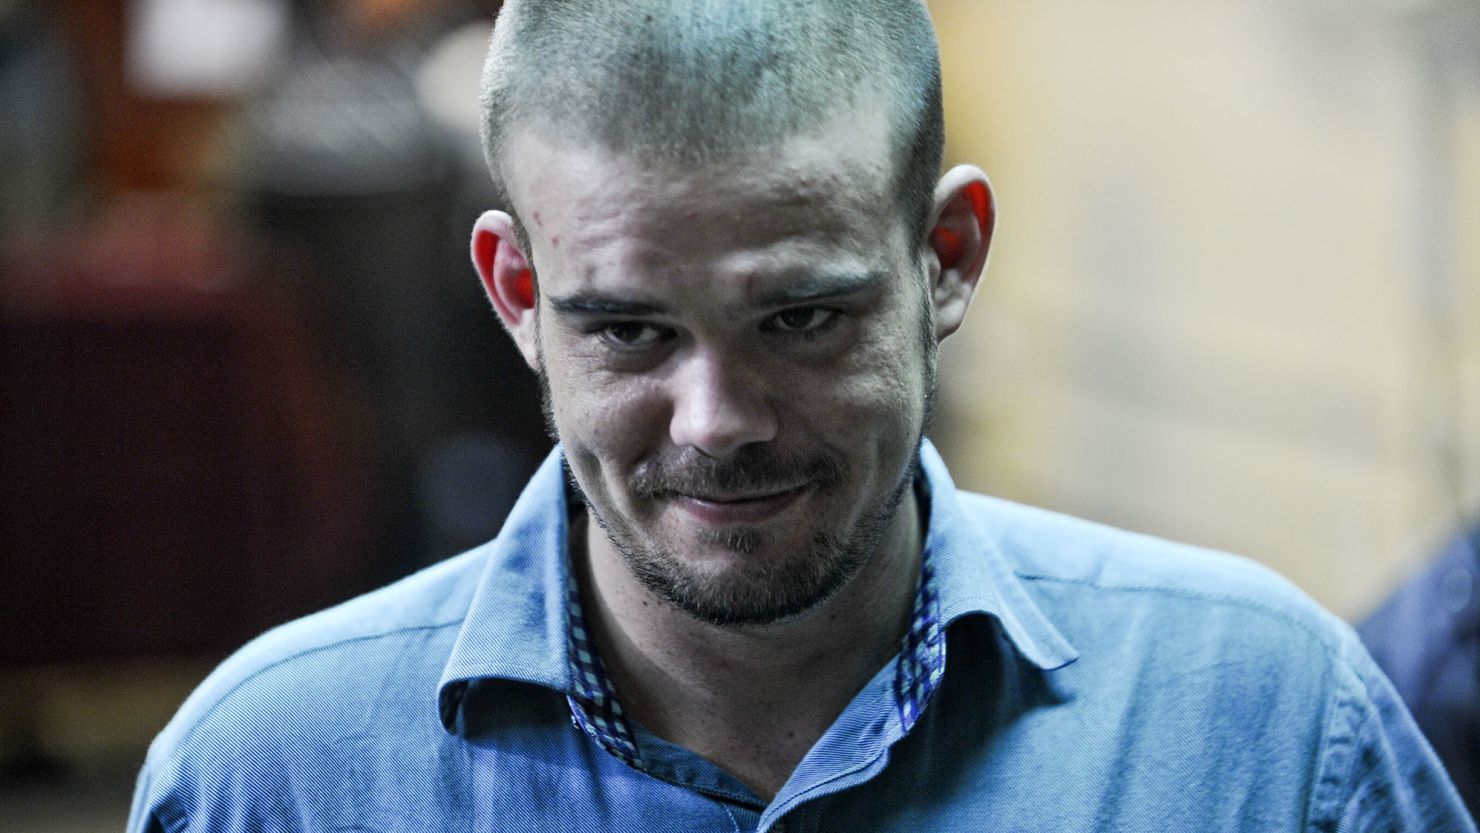 Joran Van der Sloot arrives for a hearing at the Lurigancho prison in Lima, Peru, on January 11, 2011.